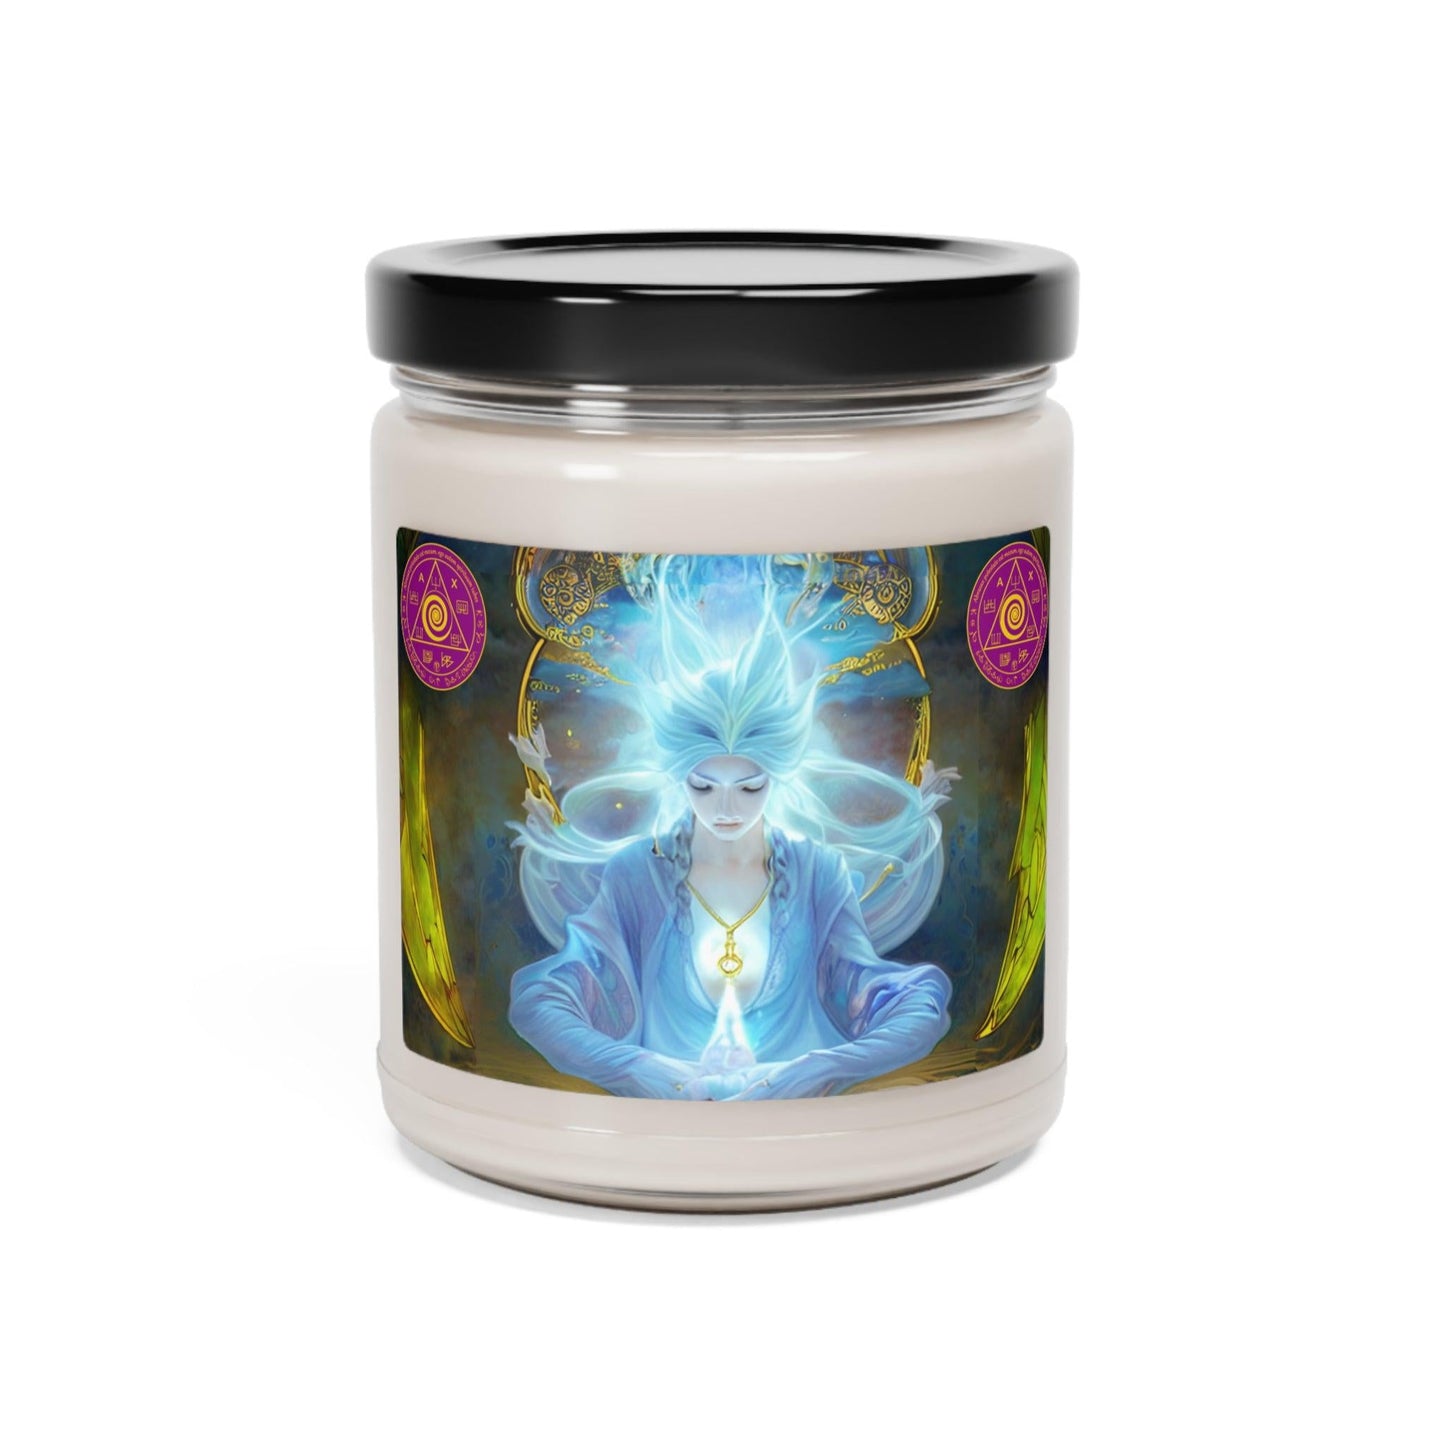 Olympic-Spirits-Cleansing-and-Protection-Scented-Soy-Candle-for-offerings-rituals-initiations-or-praying-and-meditation-16